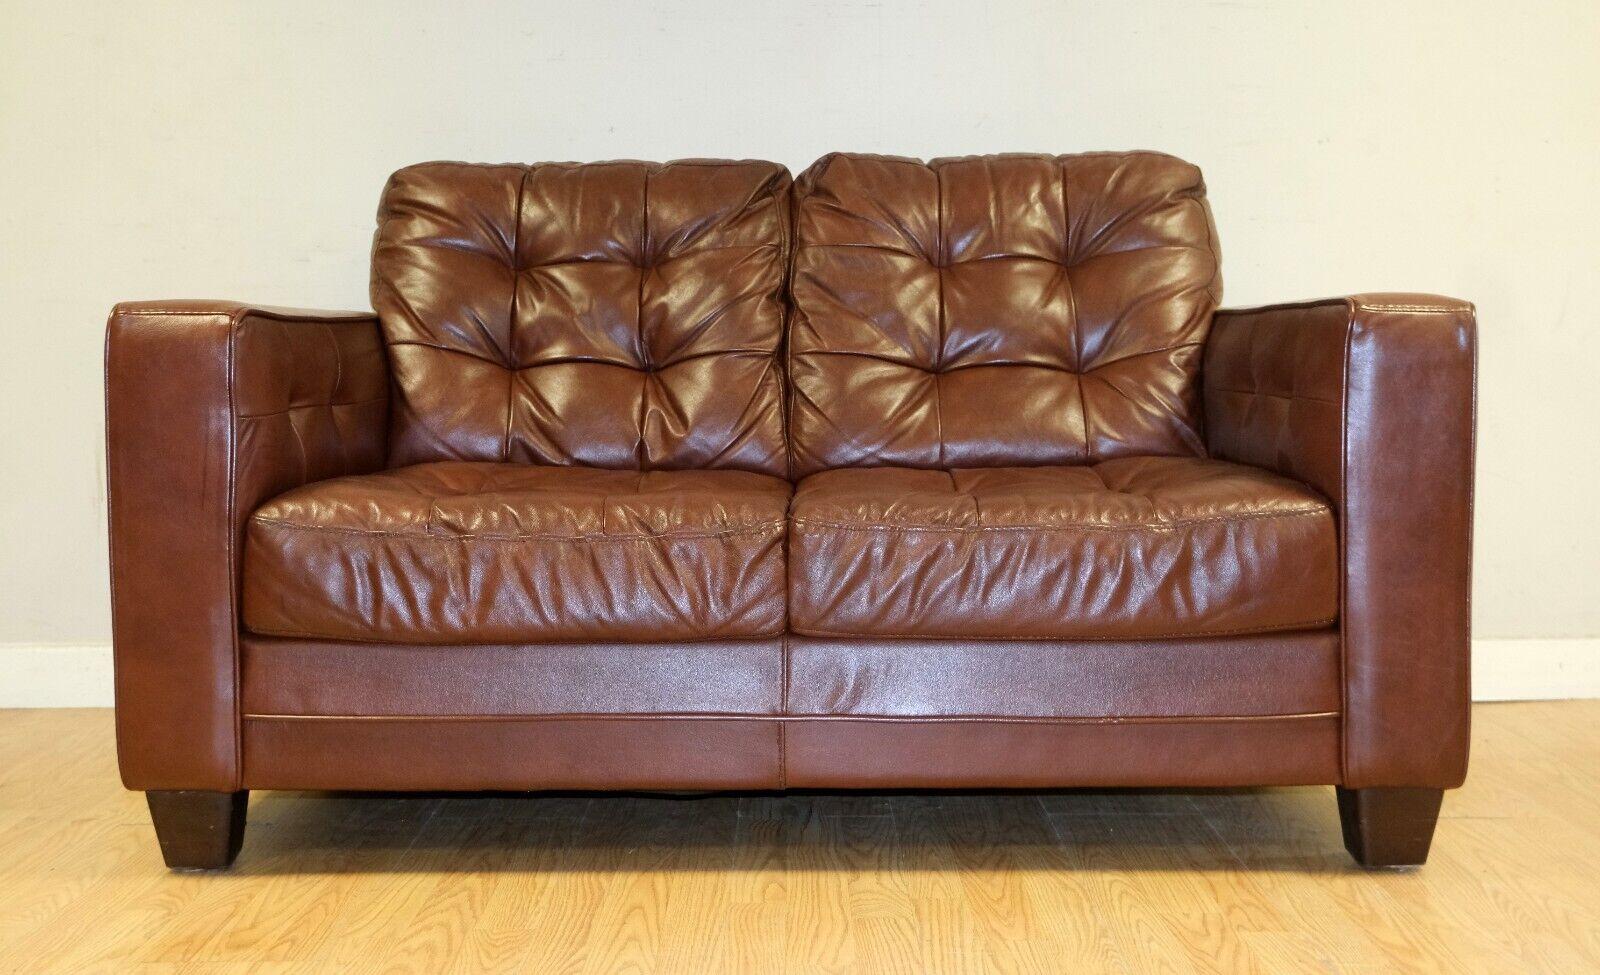 Aged Knoll Style Brown Leather Two Seater Sofa Chesterfield Style Buttoning For Sale 1